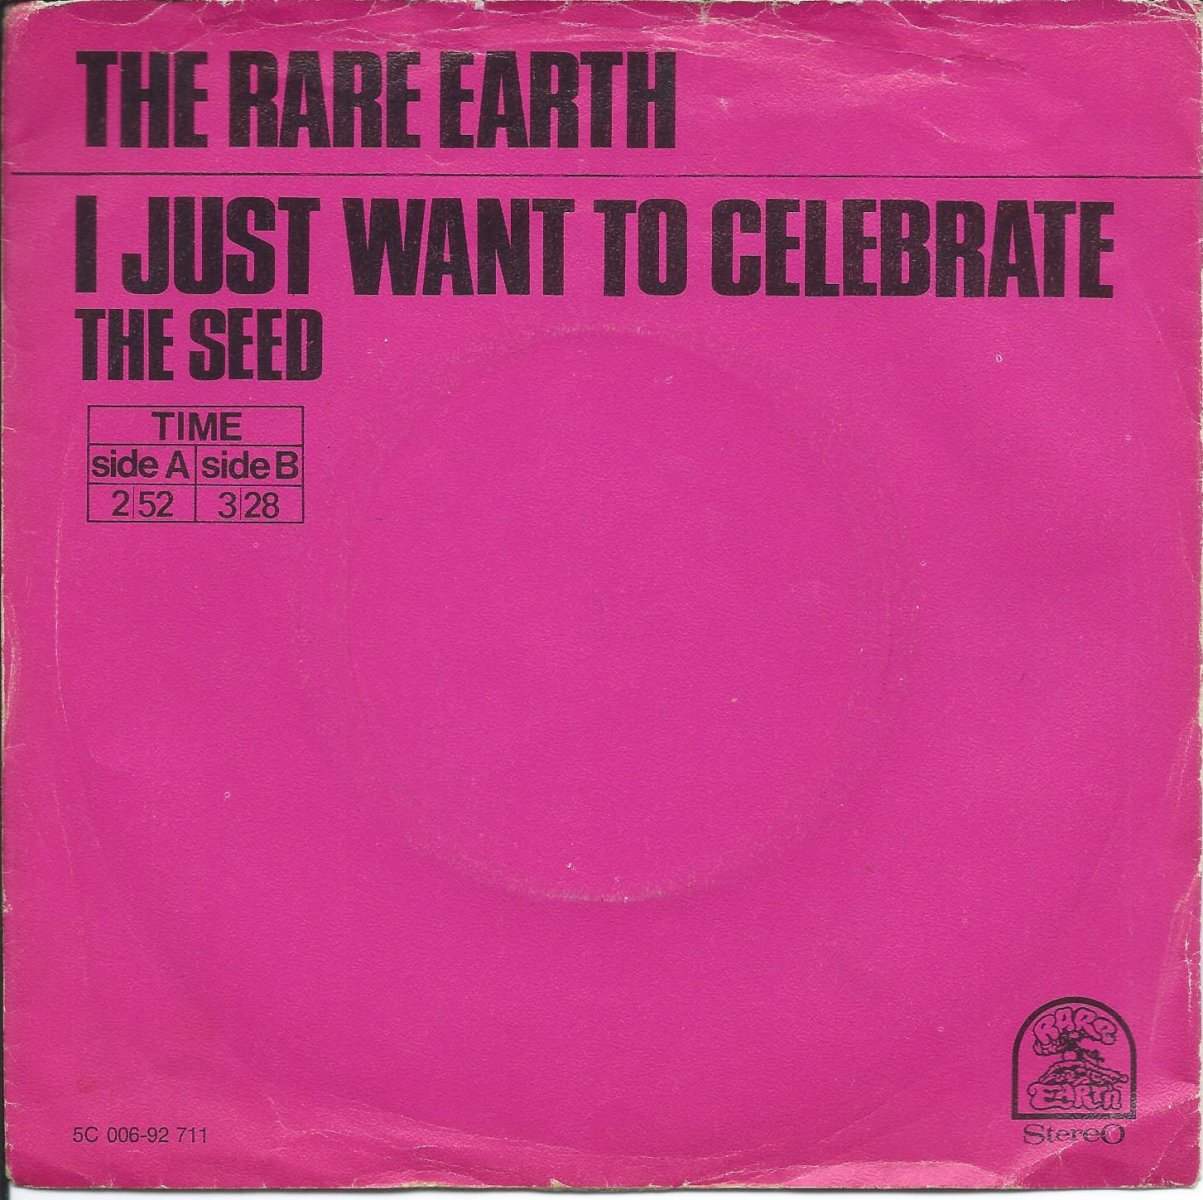 RARE EARTH / I JUST WANT TO CELEBRATE / THE SEED (7